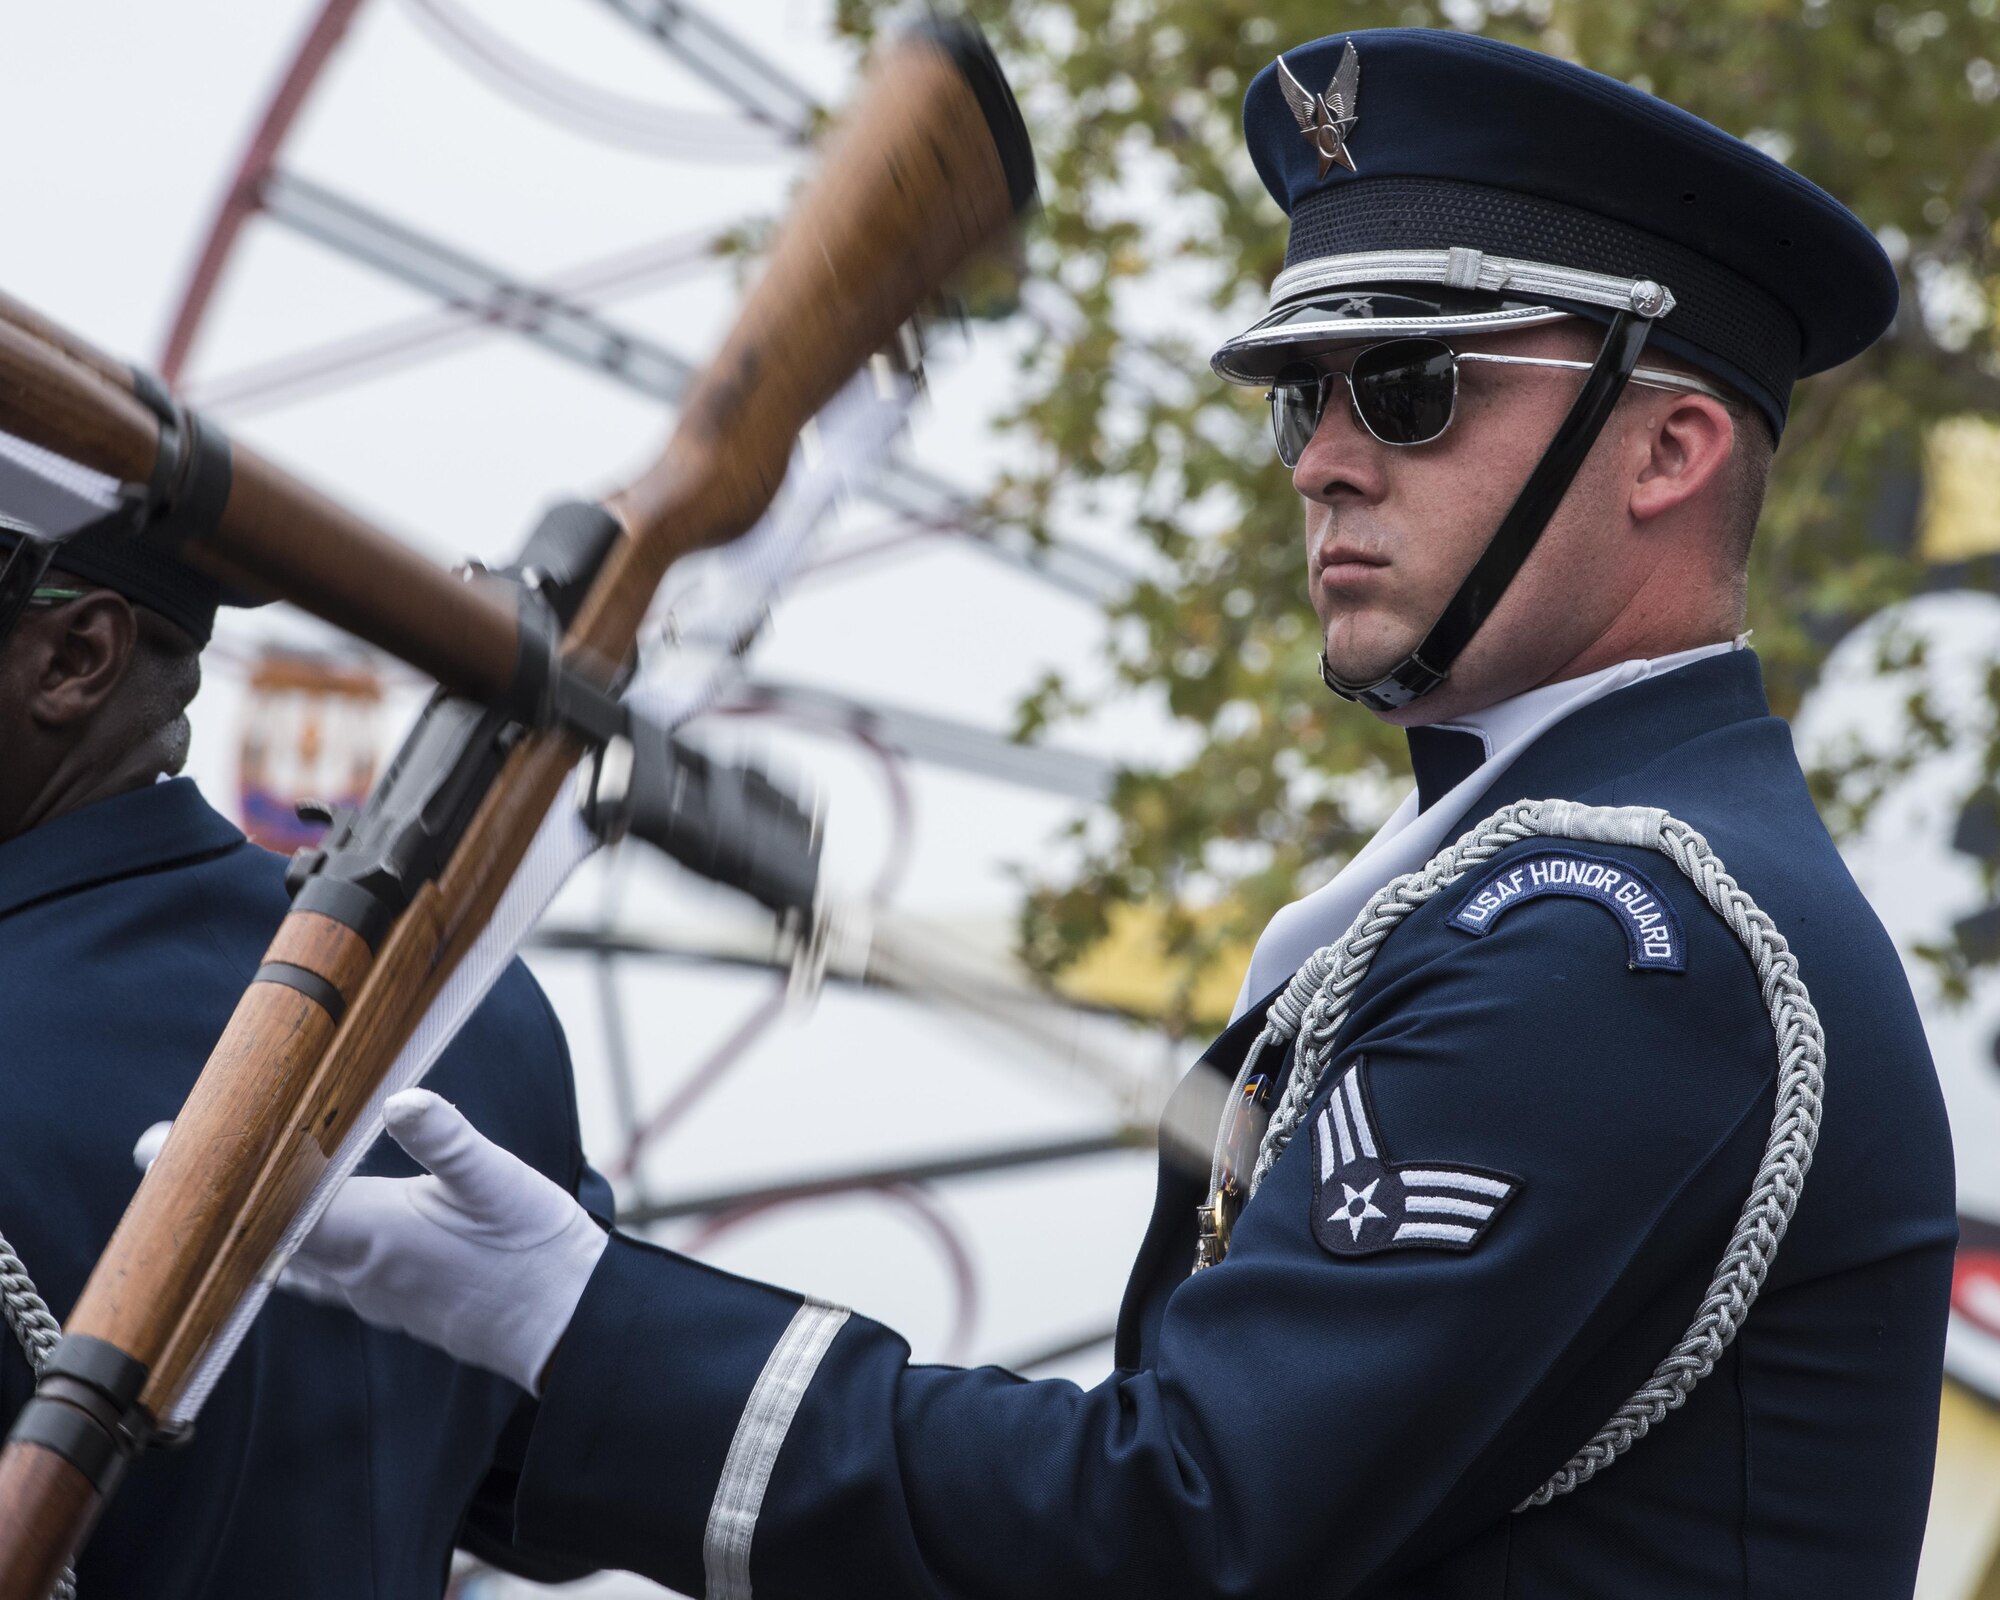 Senior Airman Rigby Carter, U.S. Air Force Honor Guard Drill Team ceremonial guardsman, performs a rifle maneuver at Disney’s California Adventure Park in Anaheim, Calif., July 1, 2017. The team develops new performances every year at Keesler Air Force Base, Miss., then proceeds to share it with the world during various outreach events until the next year. (U.S. Air Force photo by Senior Airman Jordyn Fetter)